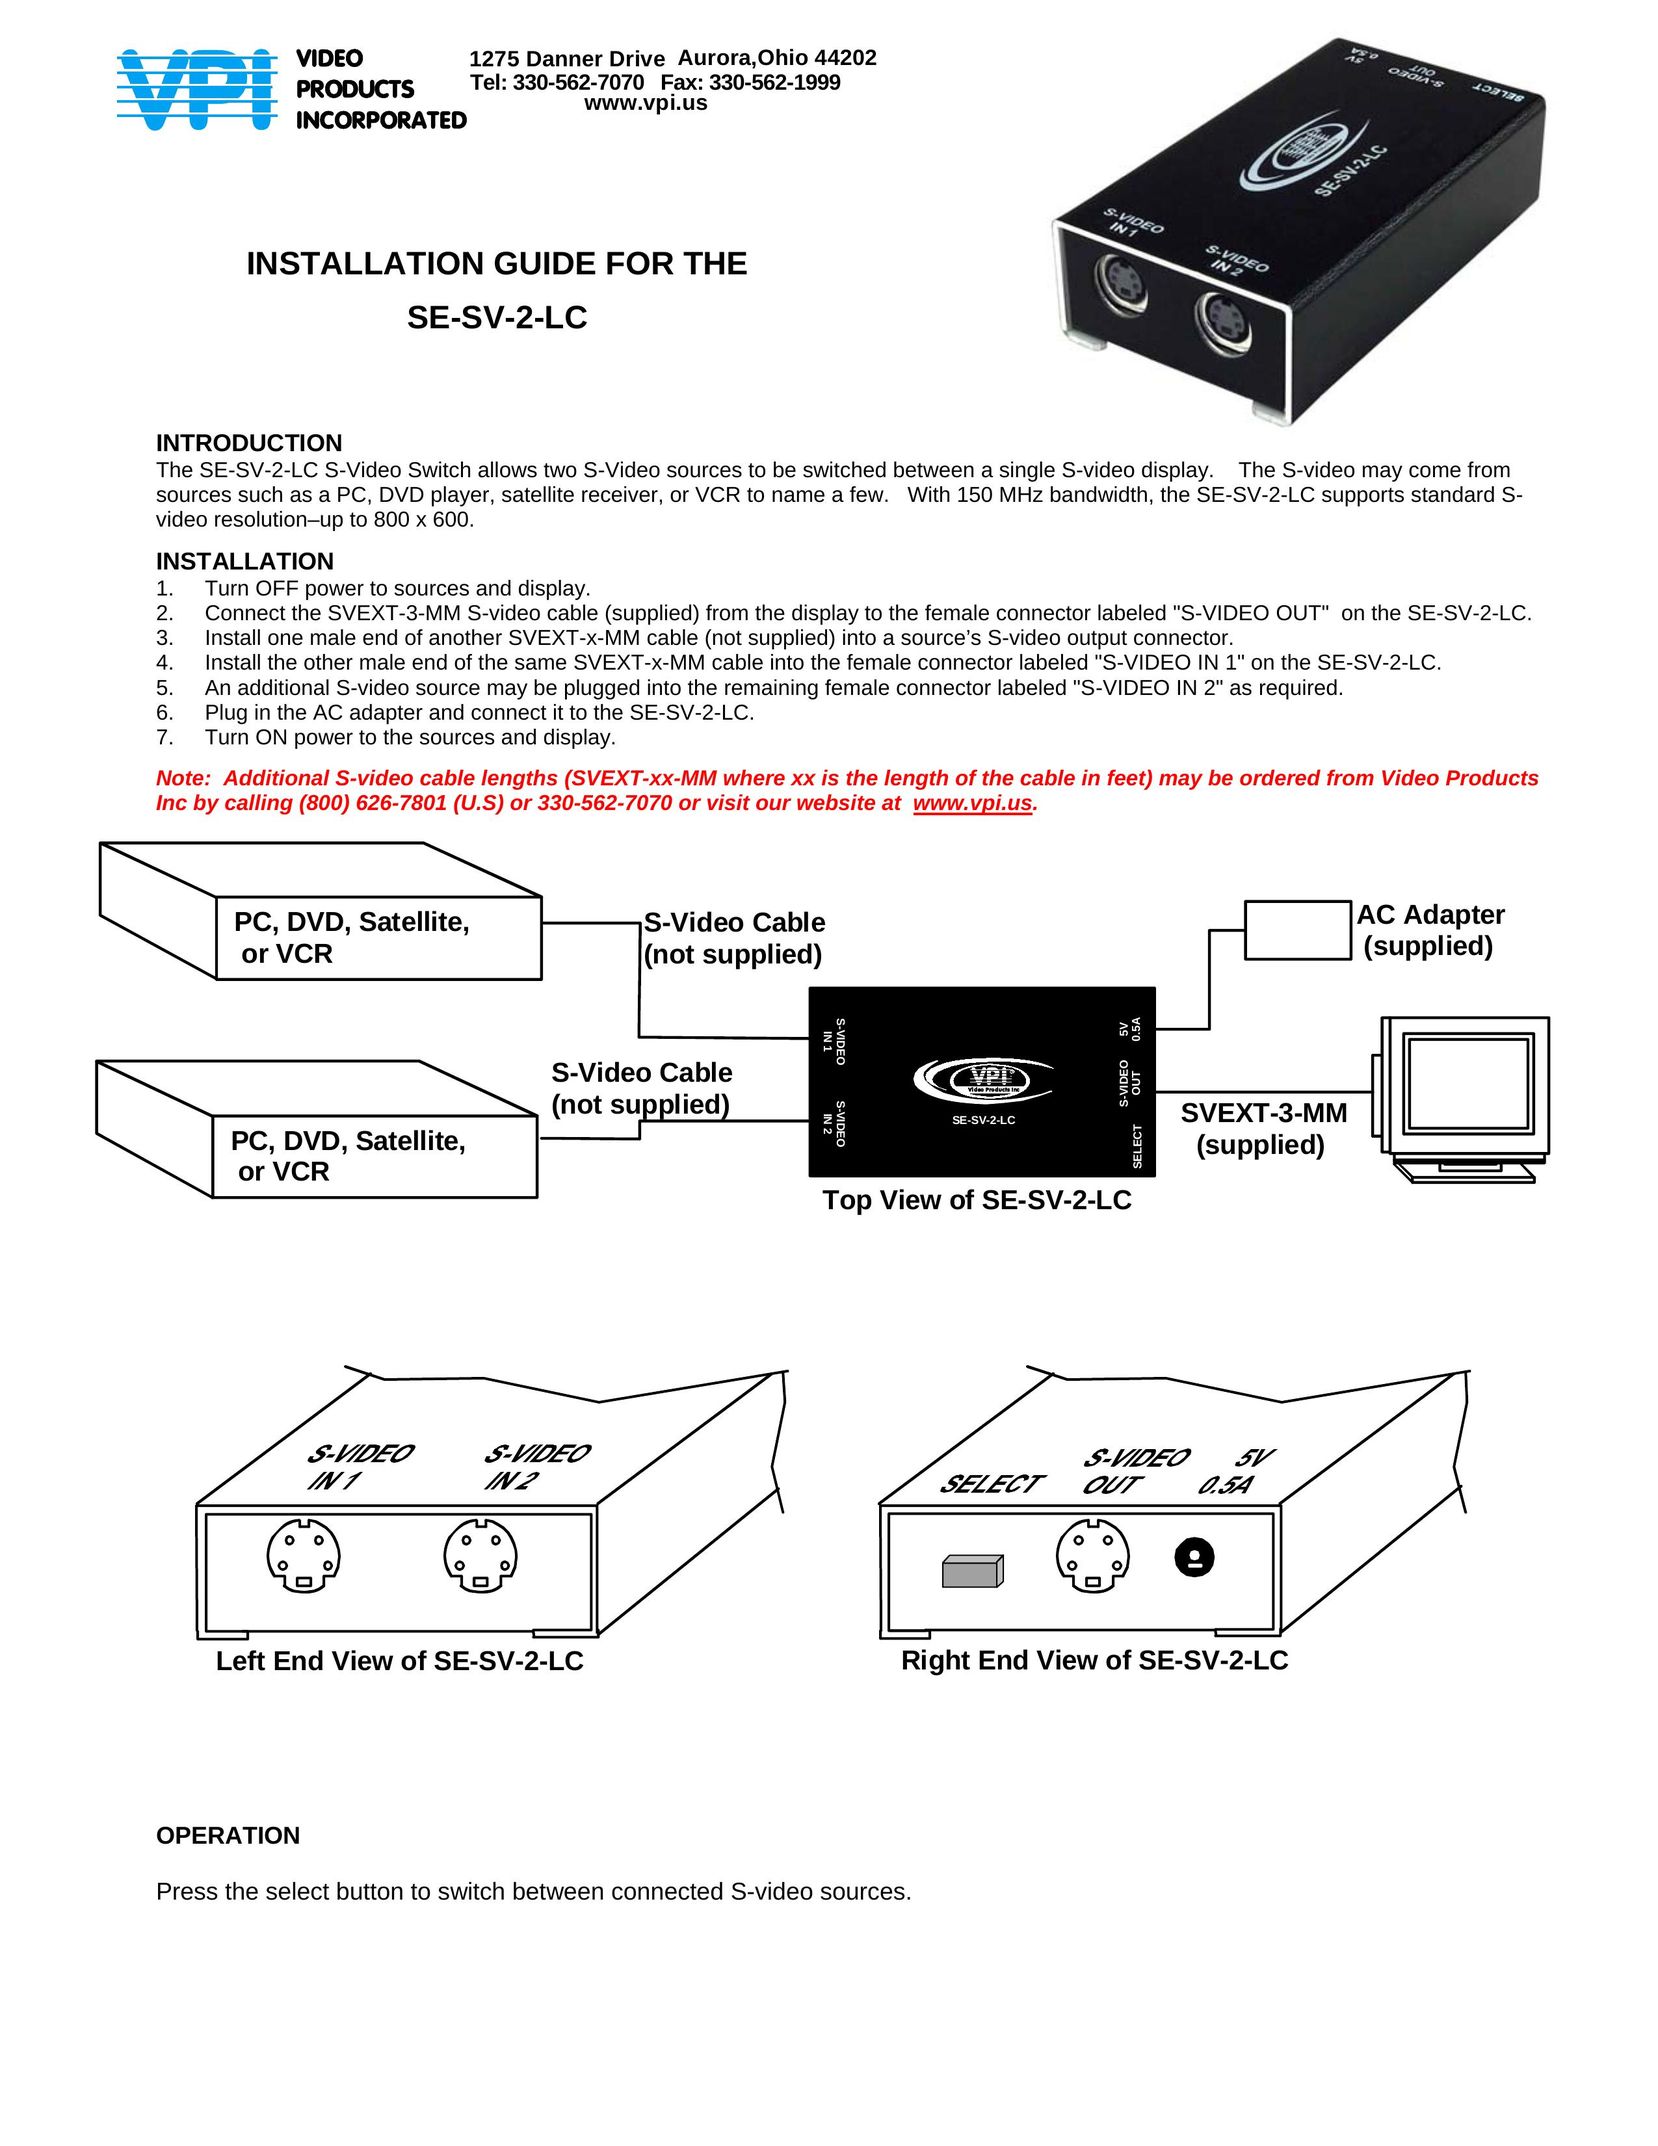 Video Products SE-SV-2-LC Computer Hardware User Manual